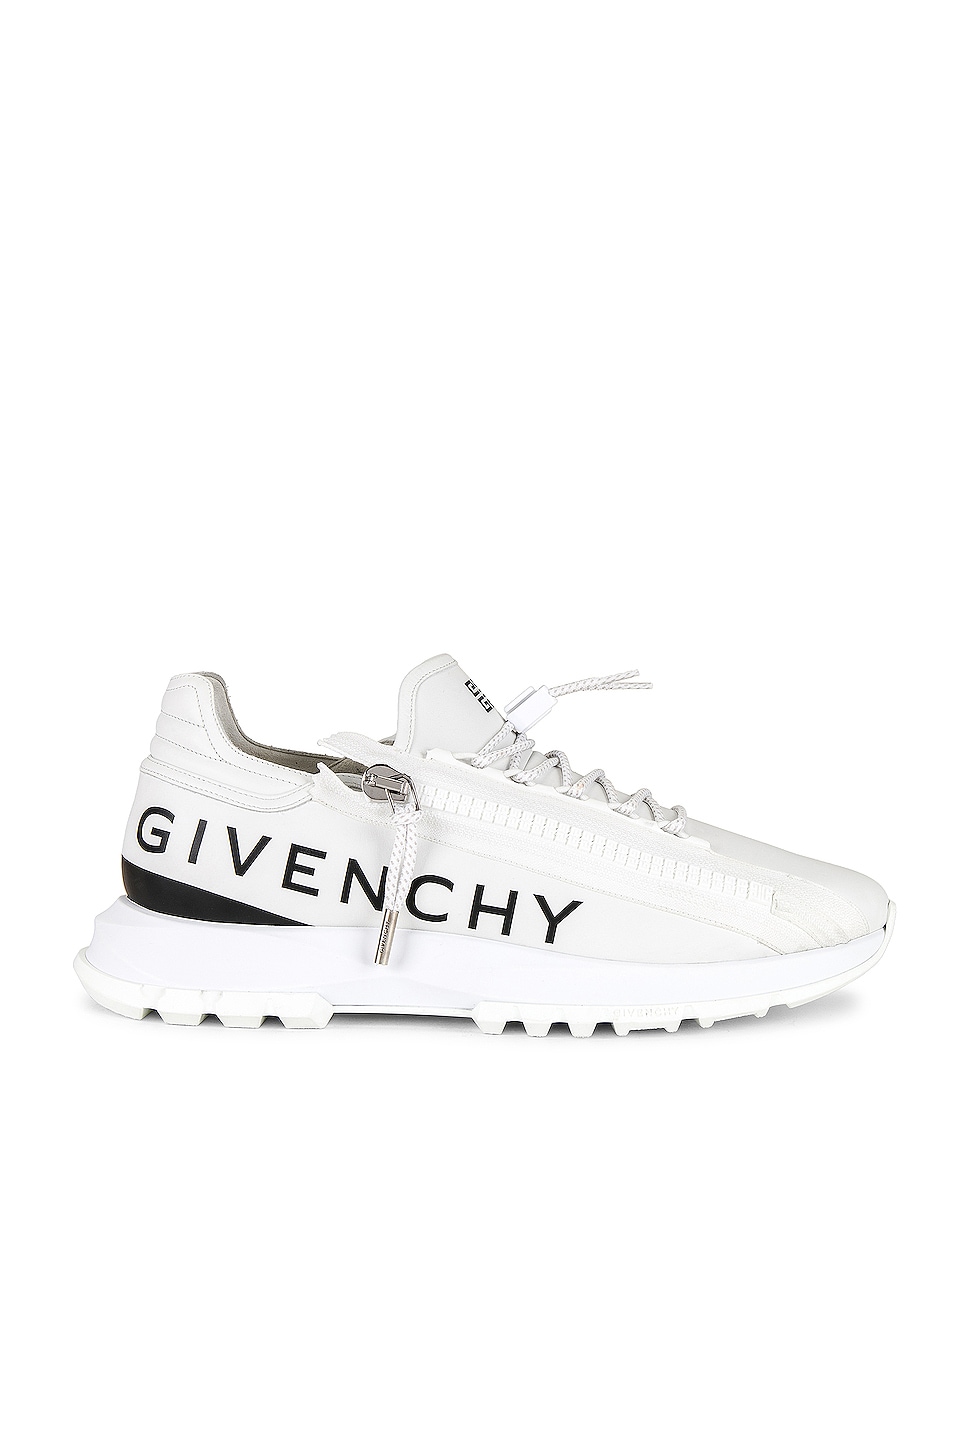 Image 1 of Givenchy Spectre Zip Runner Ssneaker in White